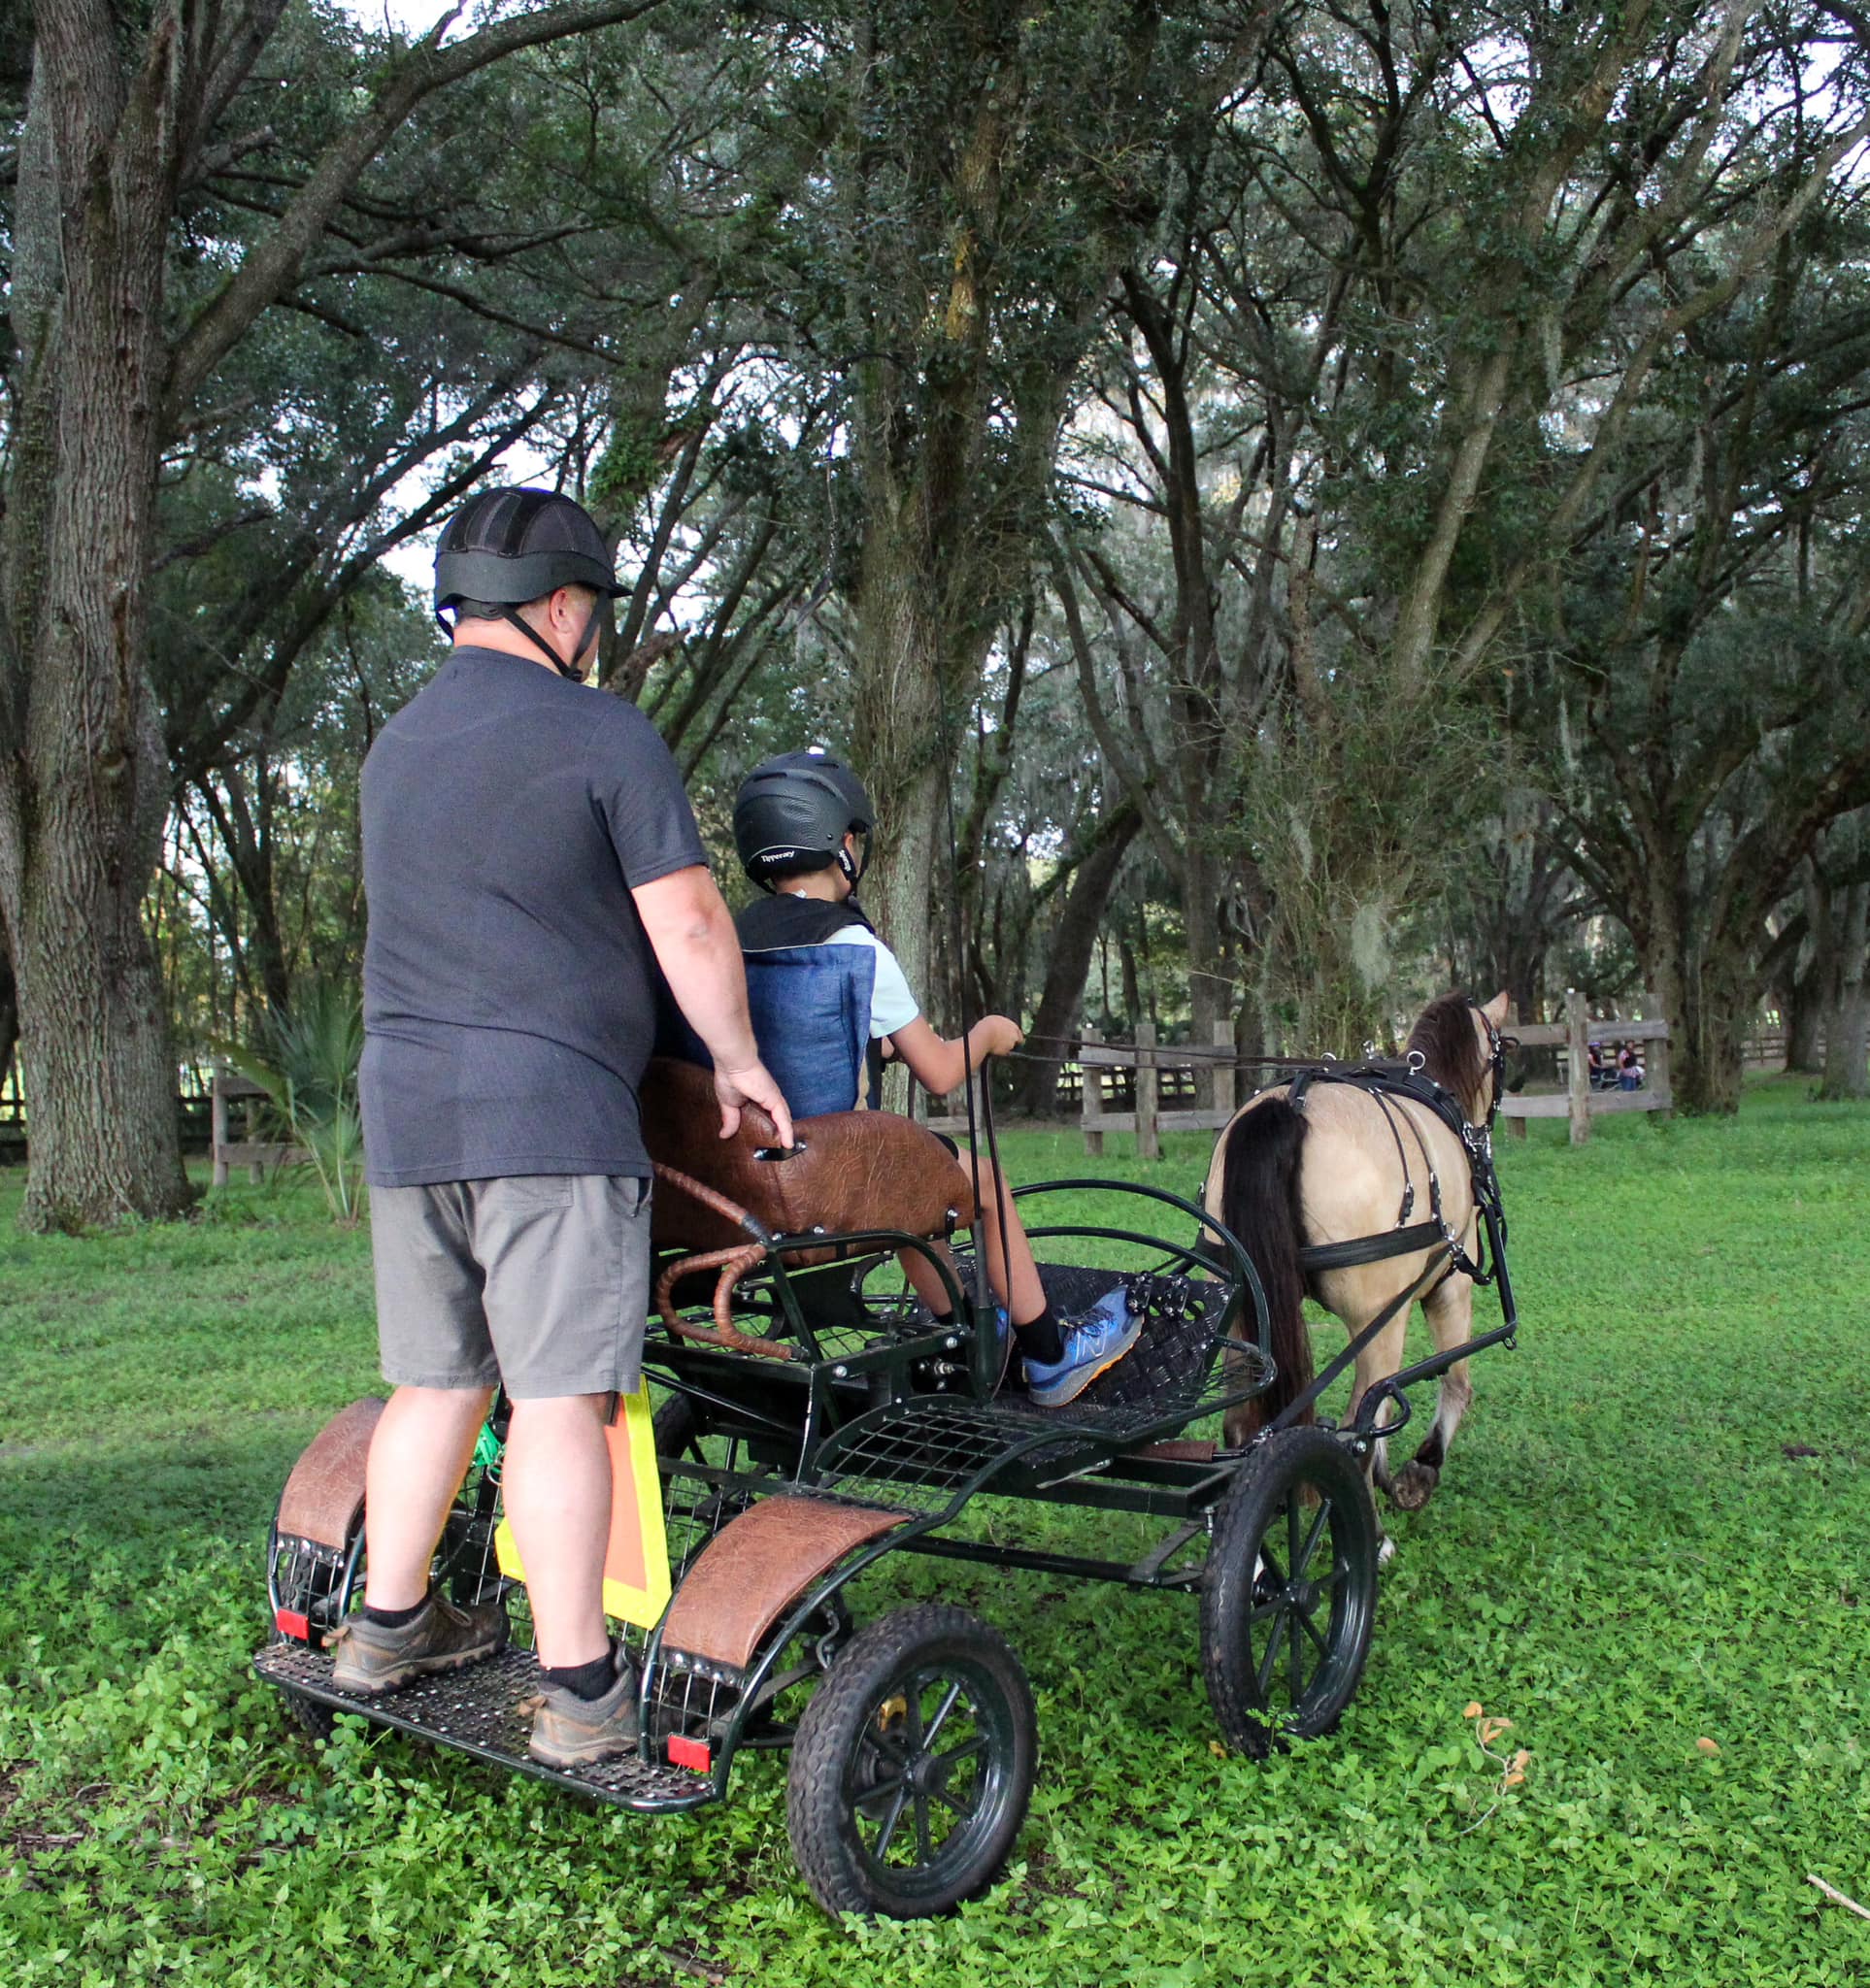 Junior carriage driver at the Grand Oaks Resort Summer Camp